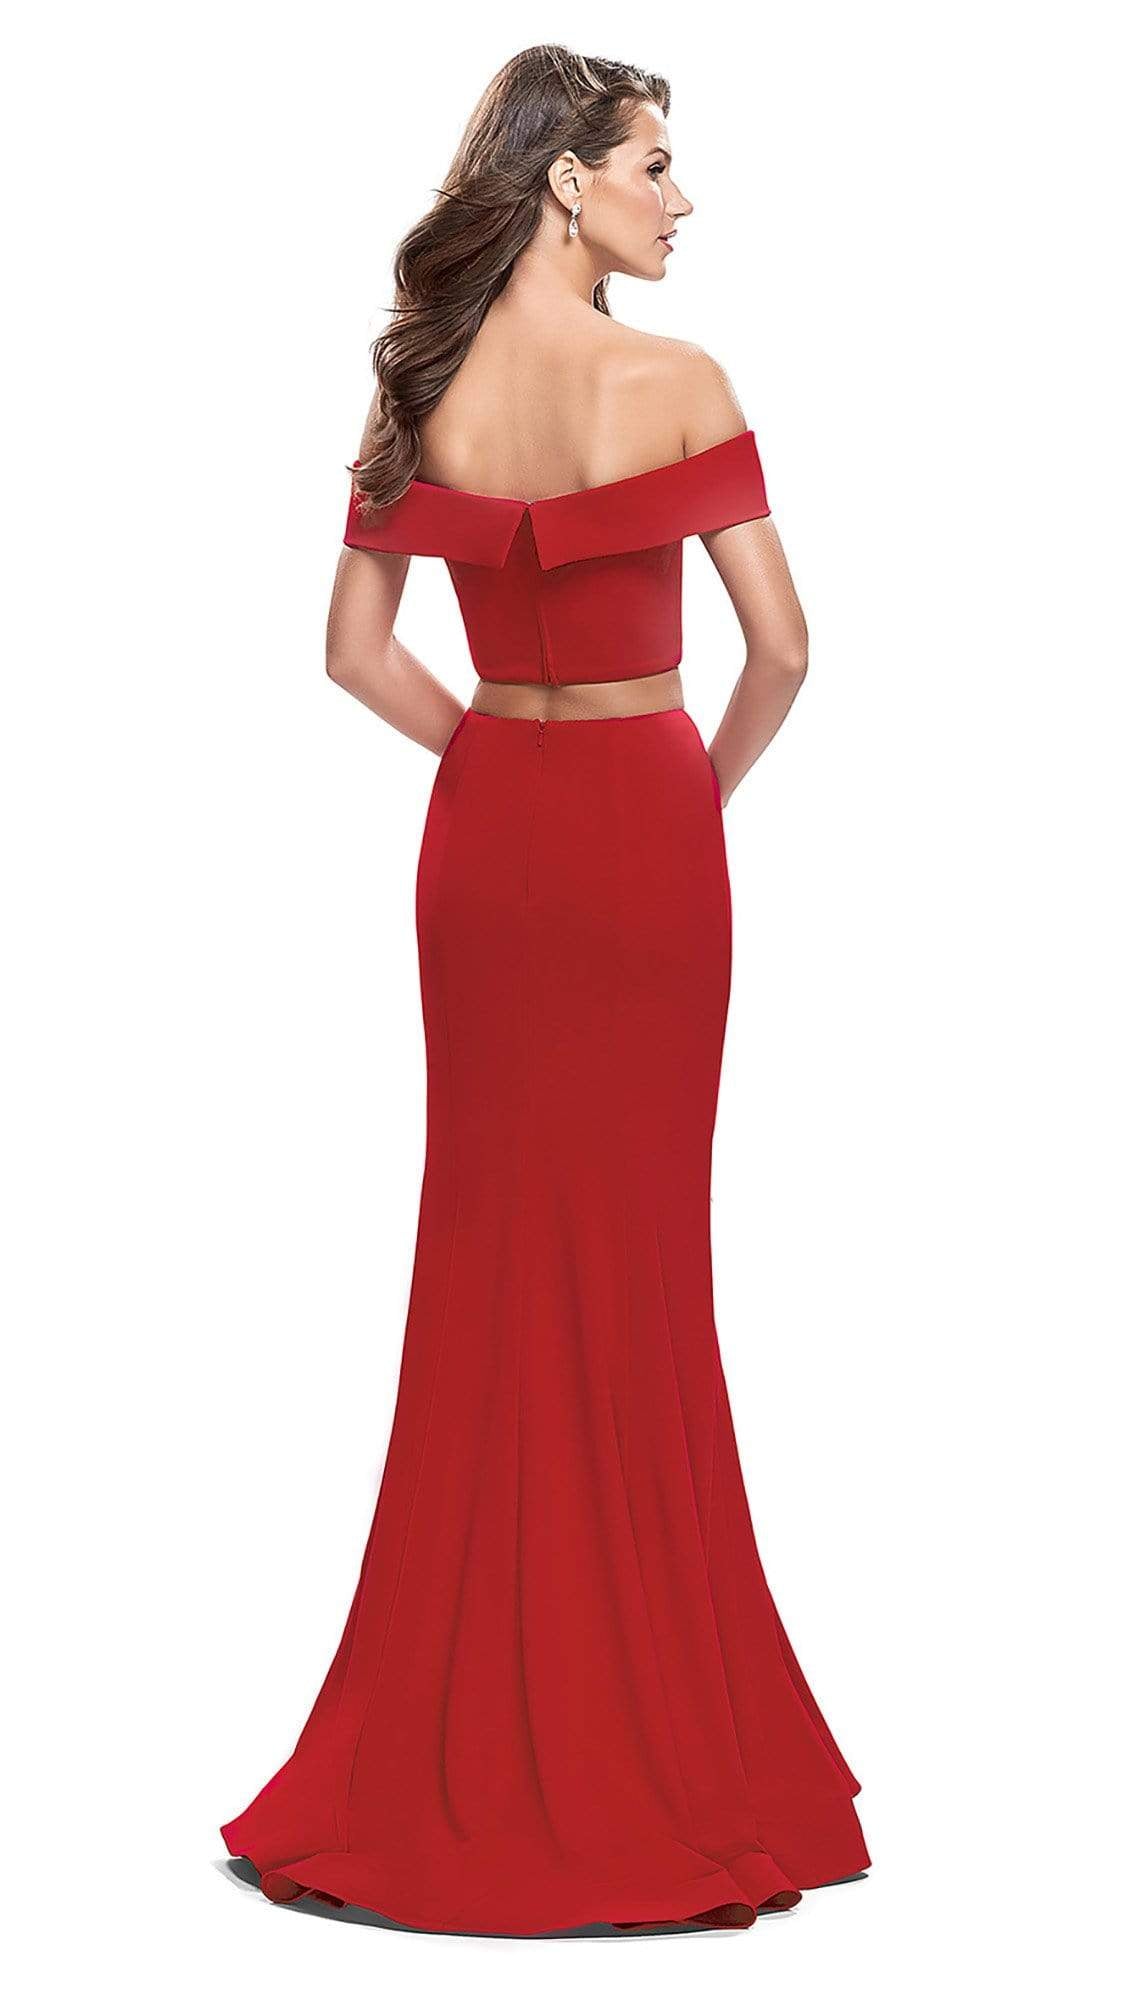 La Femme Two-Piece Fold-Over Off Shoulder Jersey Gown 25578SC - 1 Pc Navy in Size 2 Available CCSALE 2 / Navy